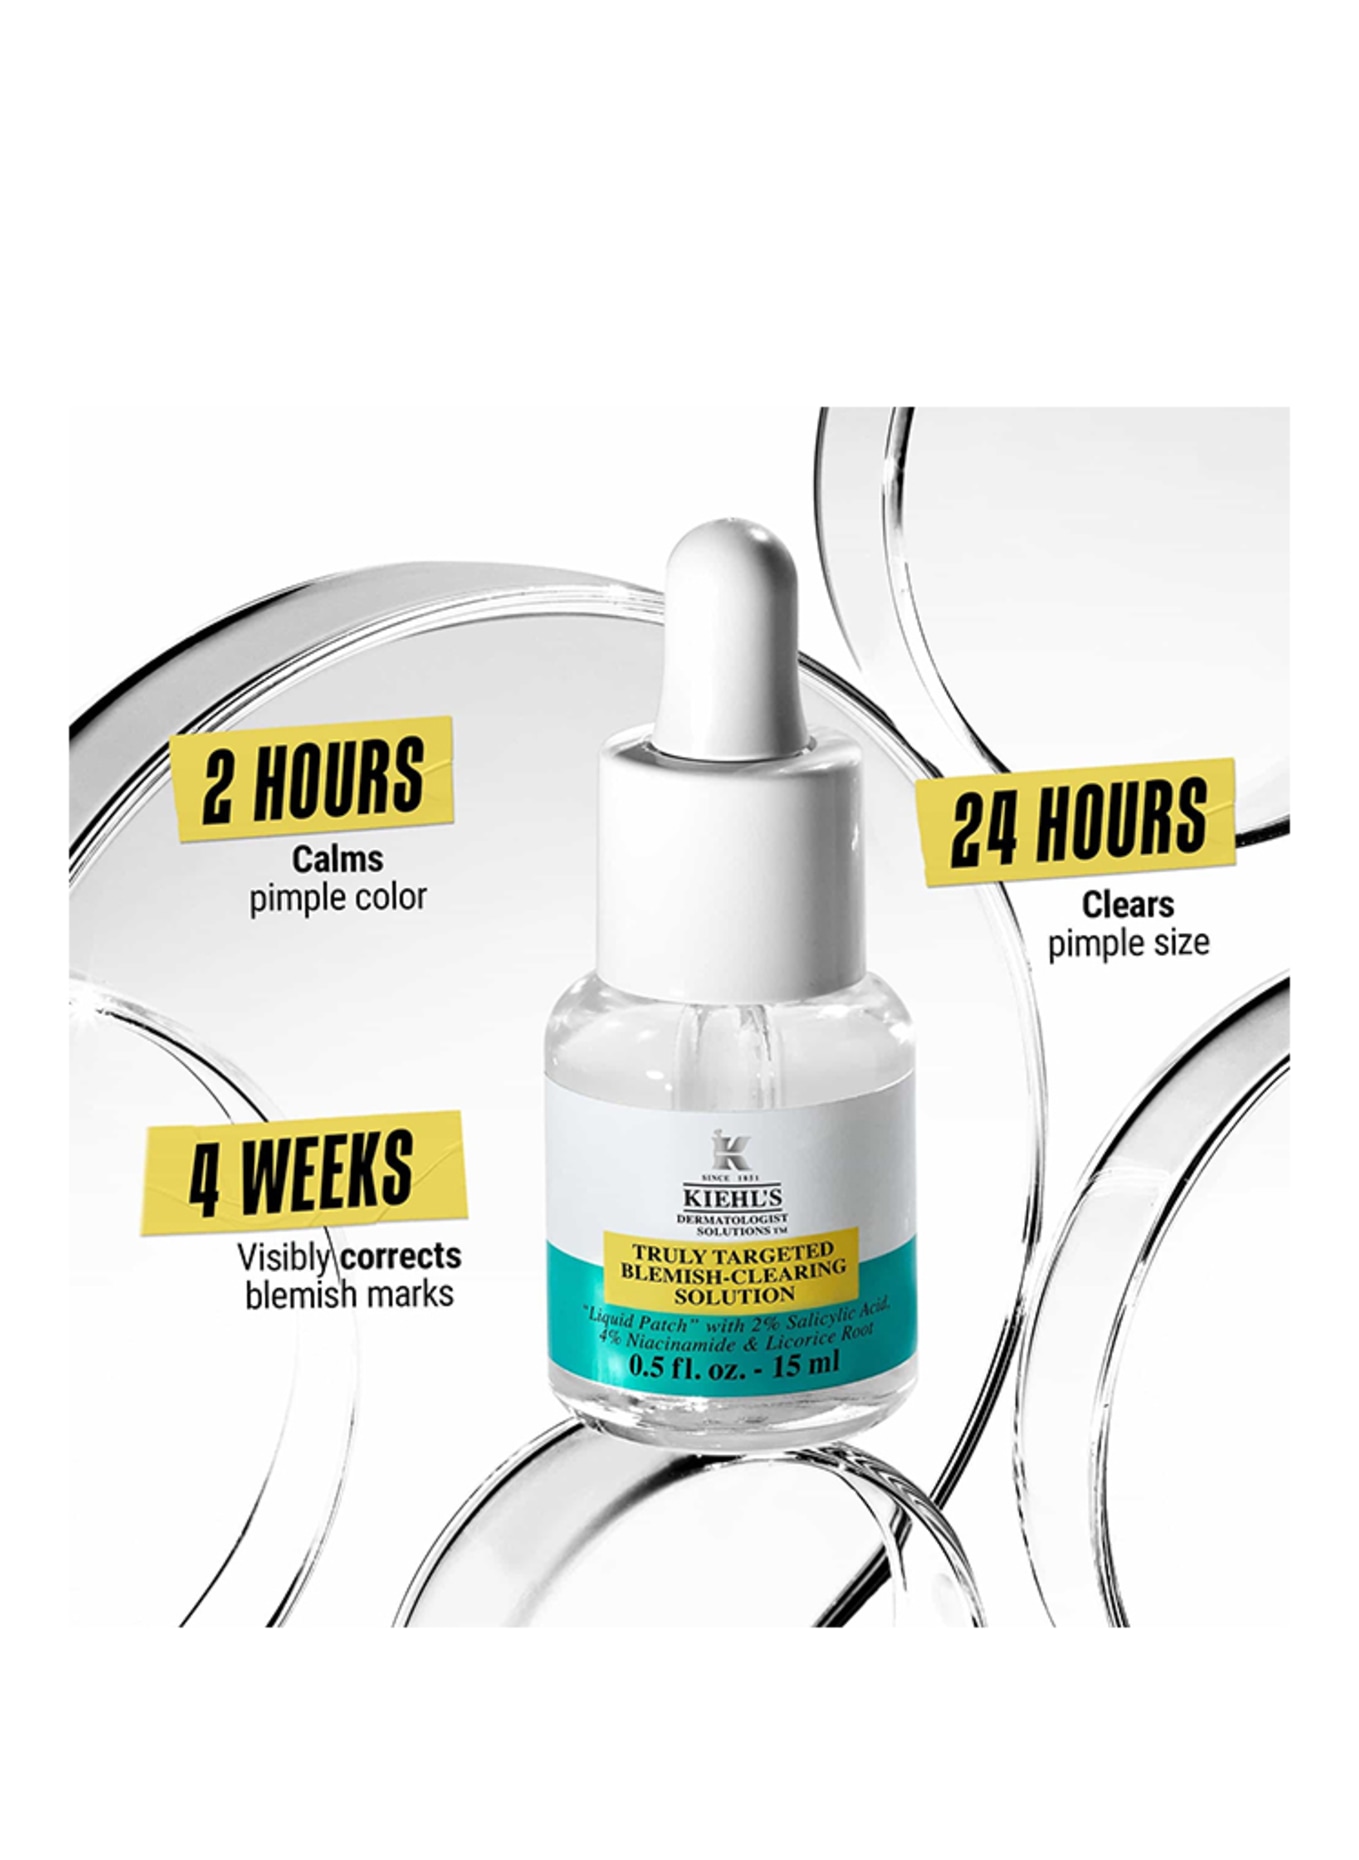 Kiehl's TRULY TARGETED BLEMISH CLEARING SOLUTION (Bild 5)